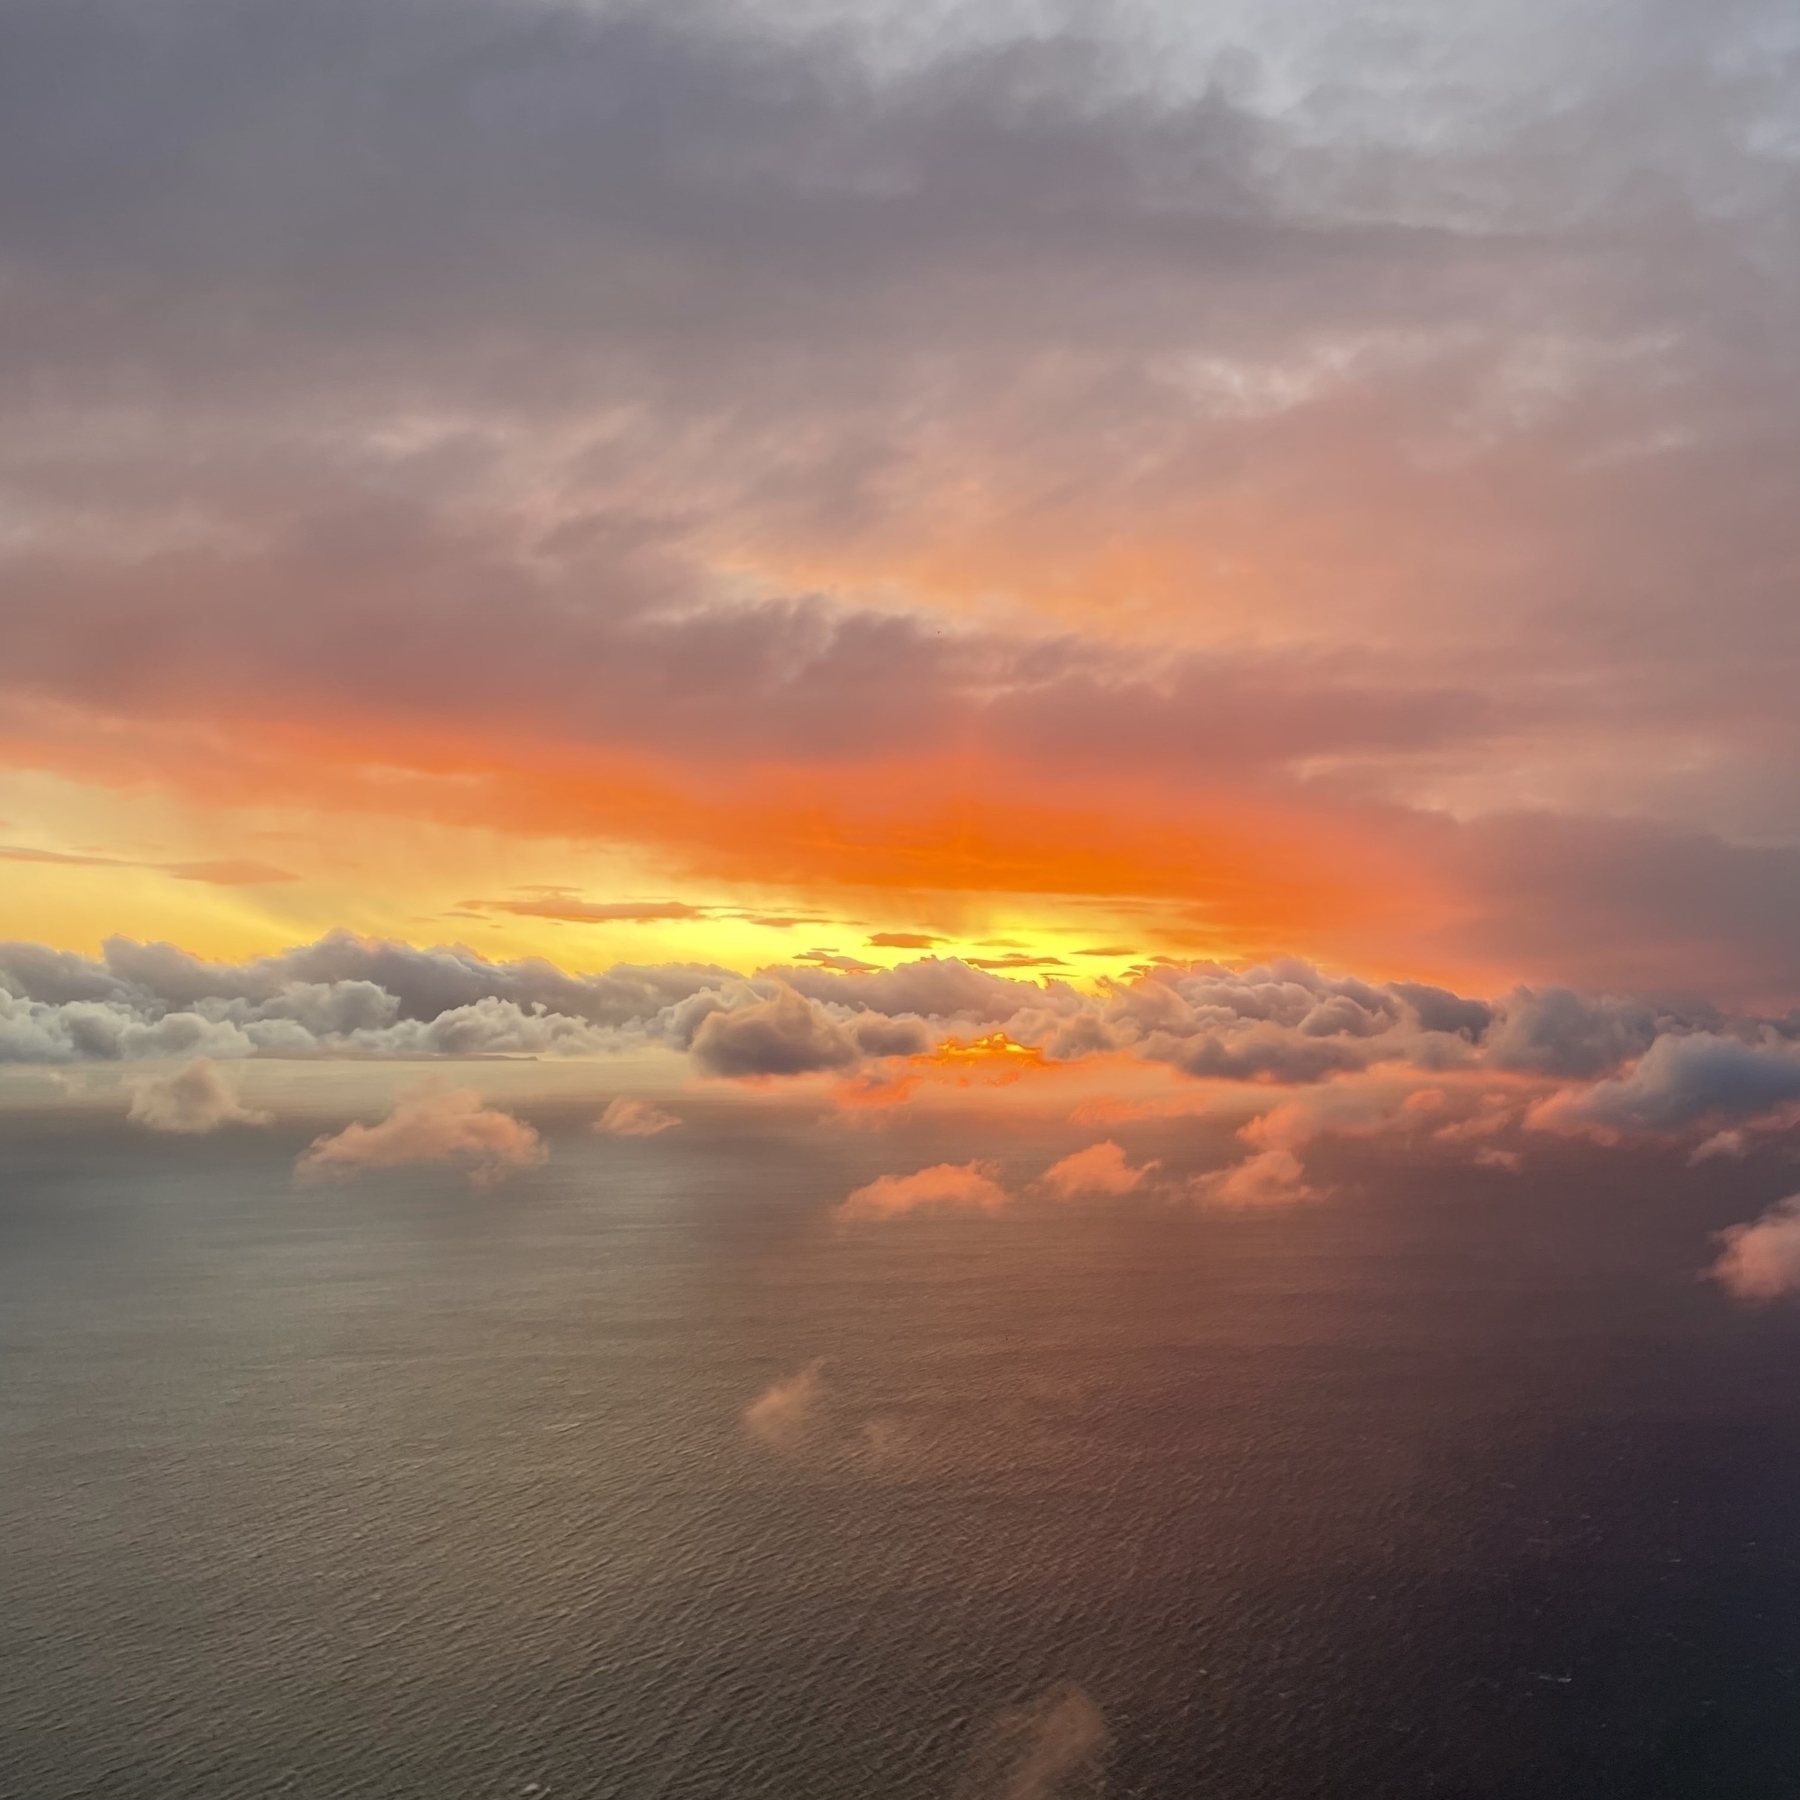 Sunset and clouds from the air - deep orange and bright yellow on the clouds